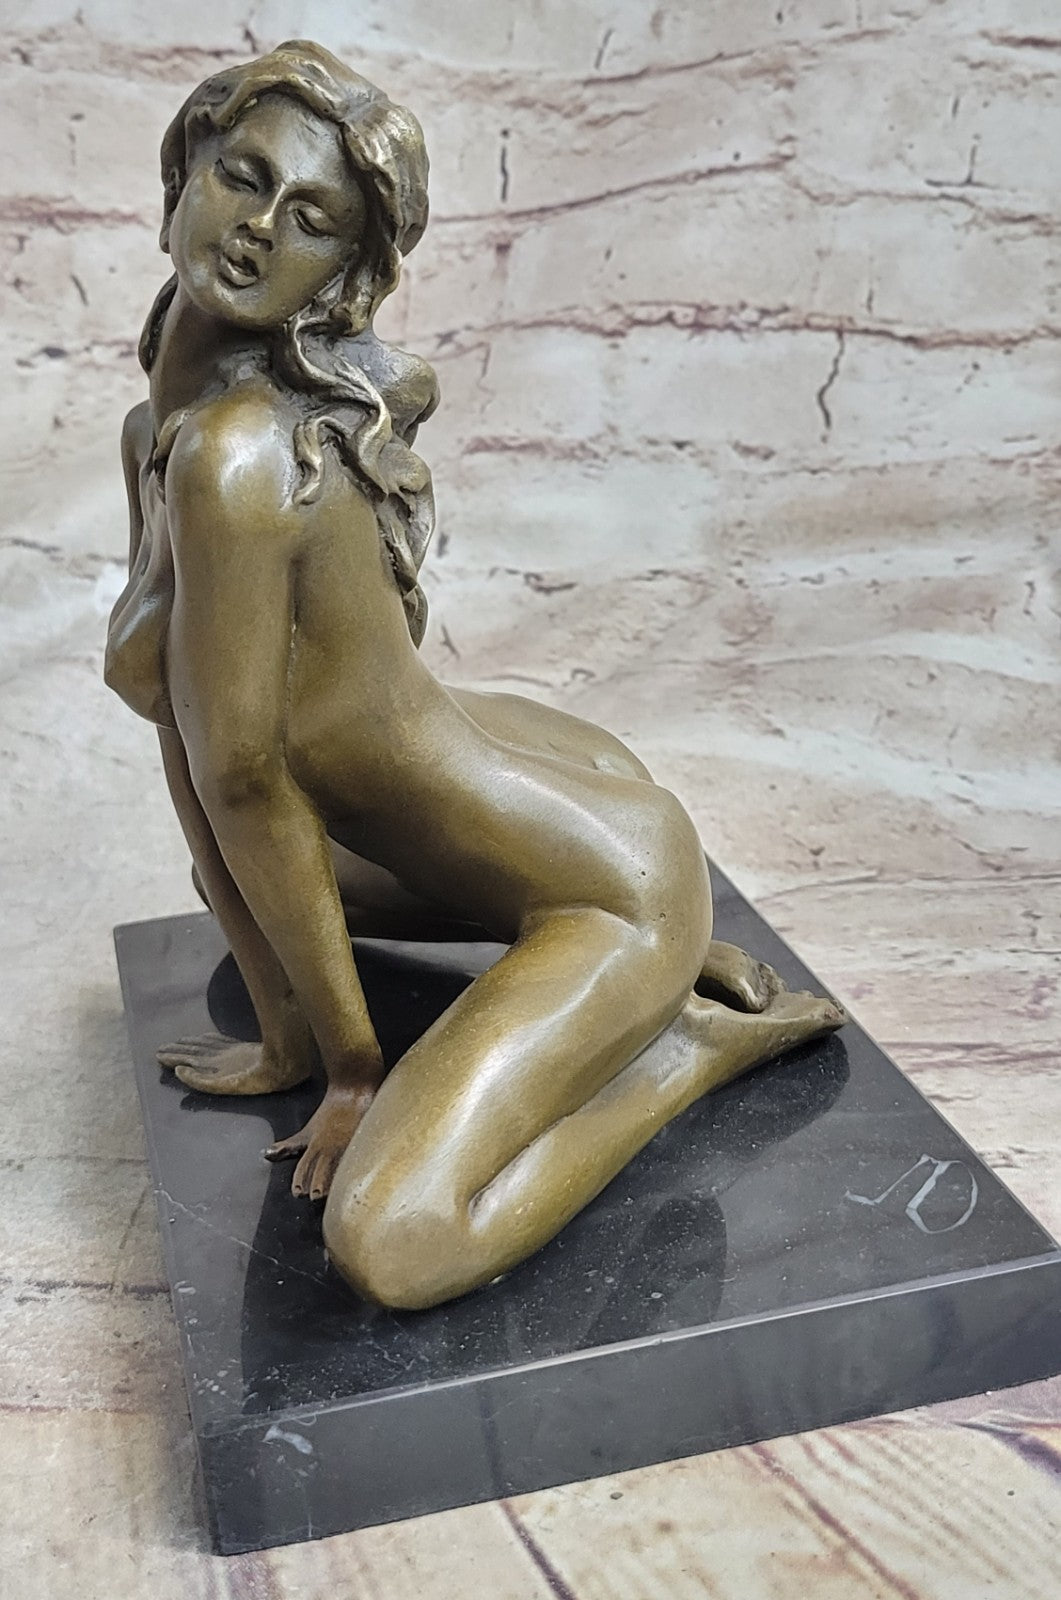 Erotic Art / Vienna Bronze Statue - Striptease - signed by Artist Naked Nude Decor